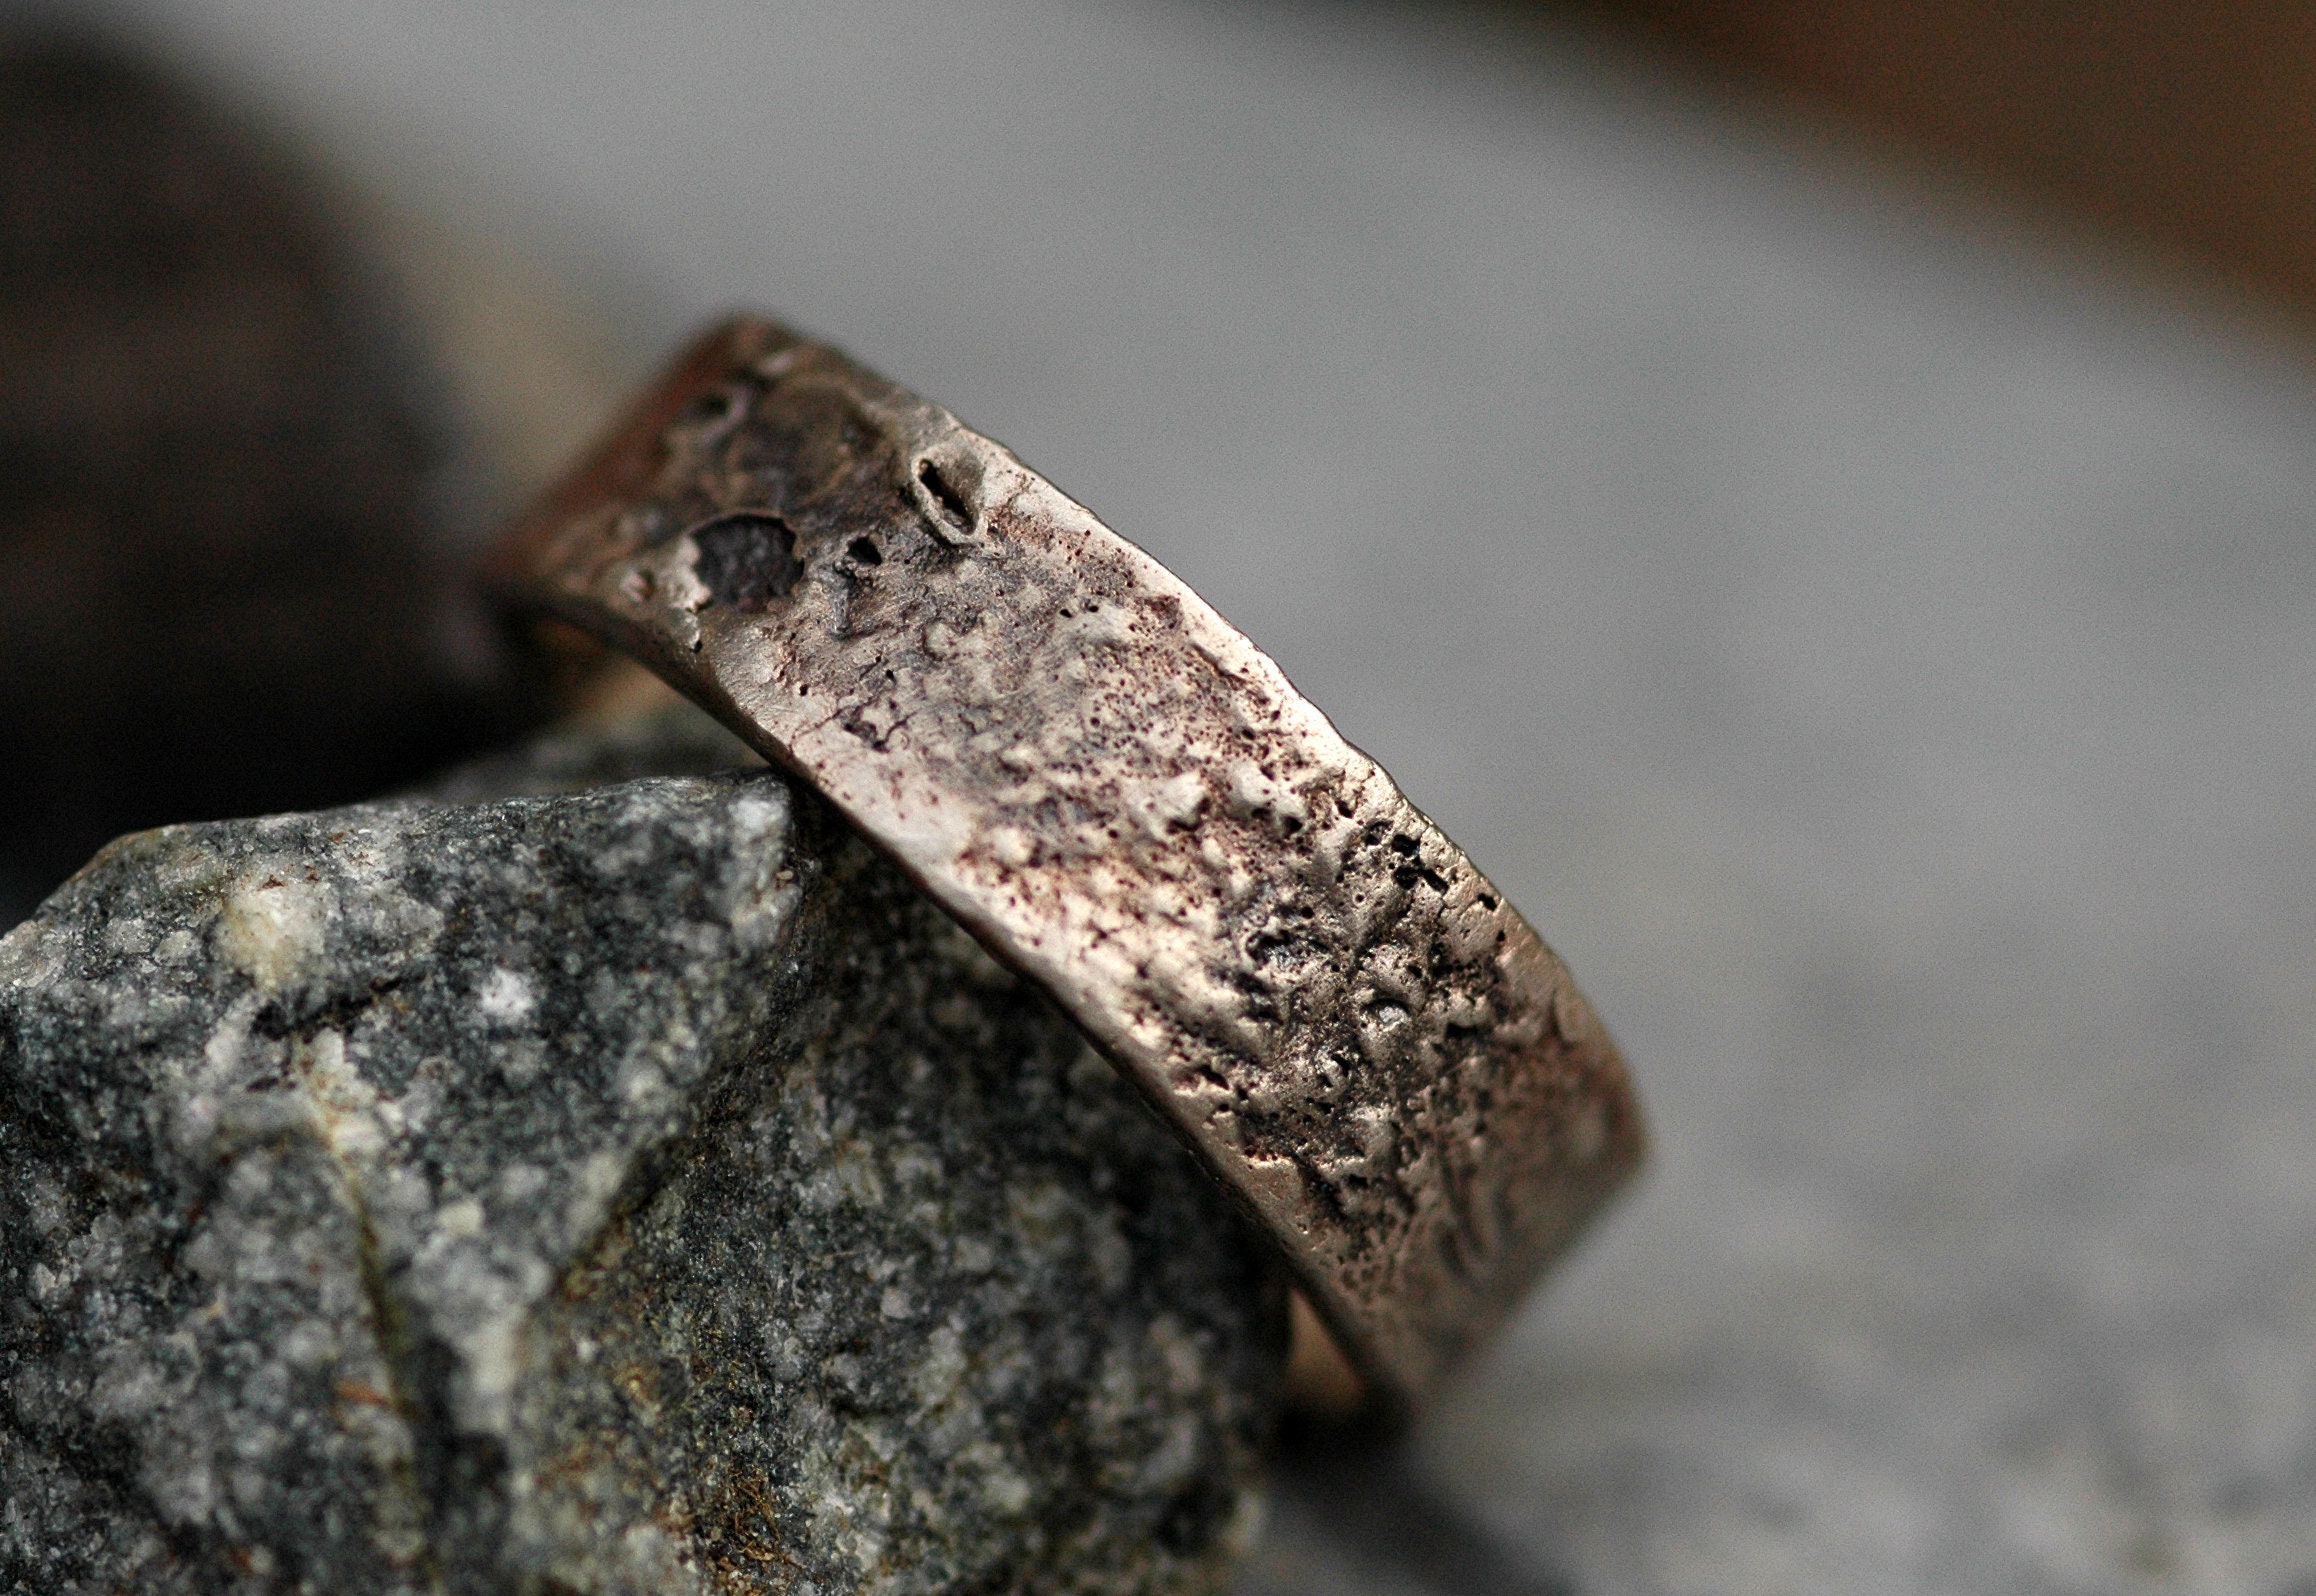 Reticulated Recycled Gold Wedding Band Set- Made to Order